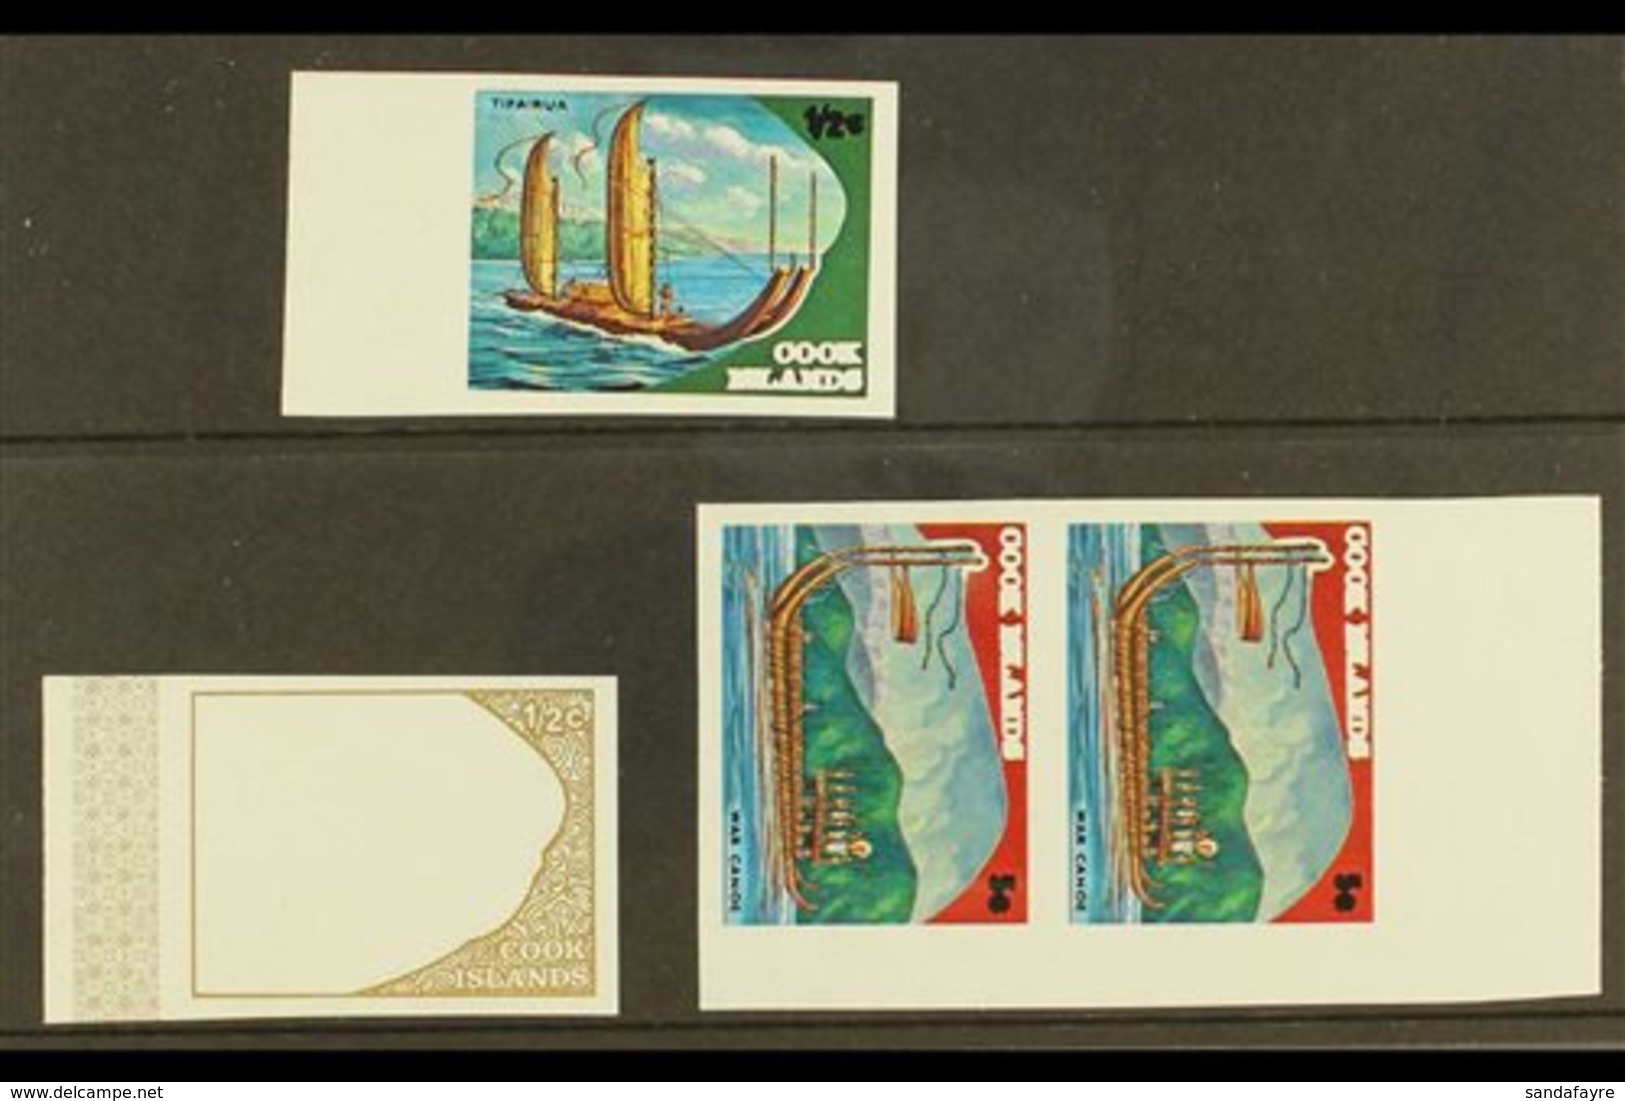 1973 IMPERF PLATE PROOFS  An Attractive Selection From The Maori Exploration Issue With ½c Gold Frame & Coloured "Tipair - Cook Islands